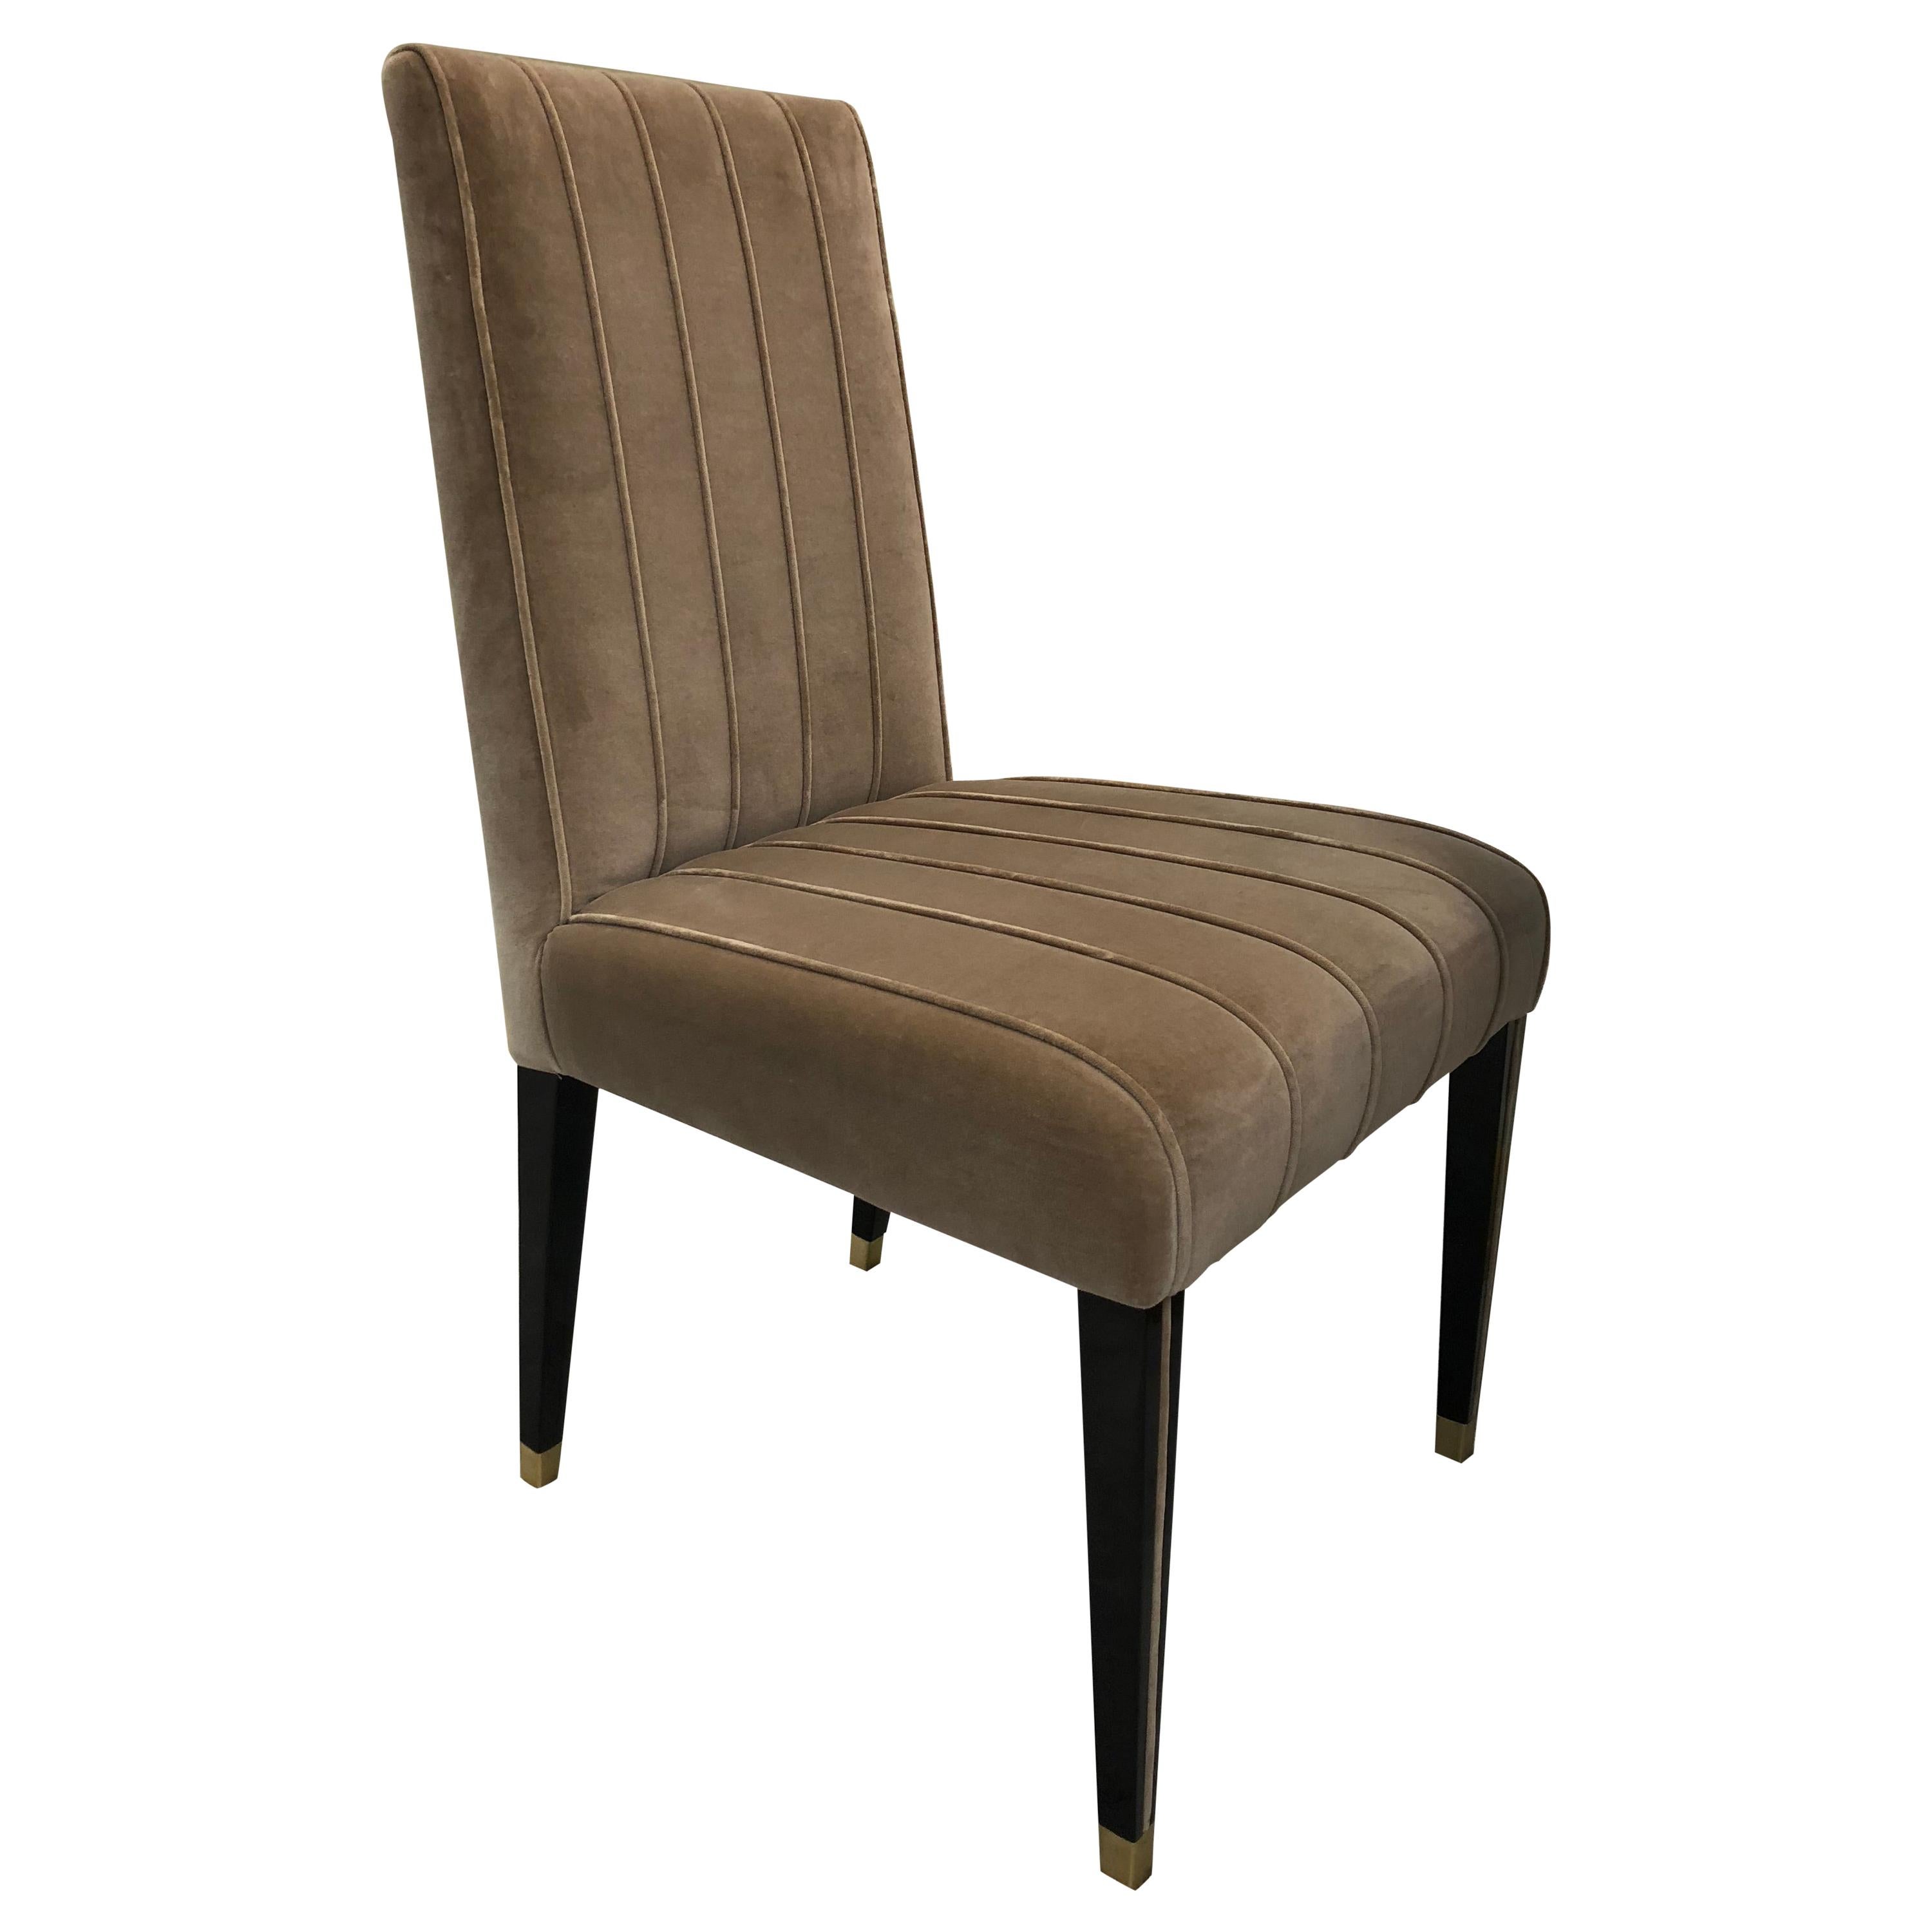 Set of 4 Beige Glória Dining Chair with Brass Tips and Glossy Chocolate Legs For Sale